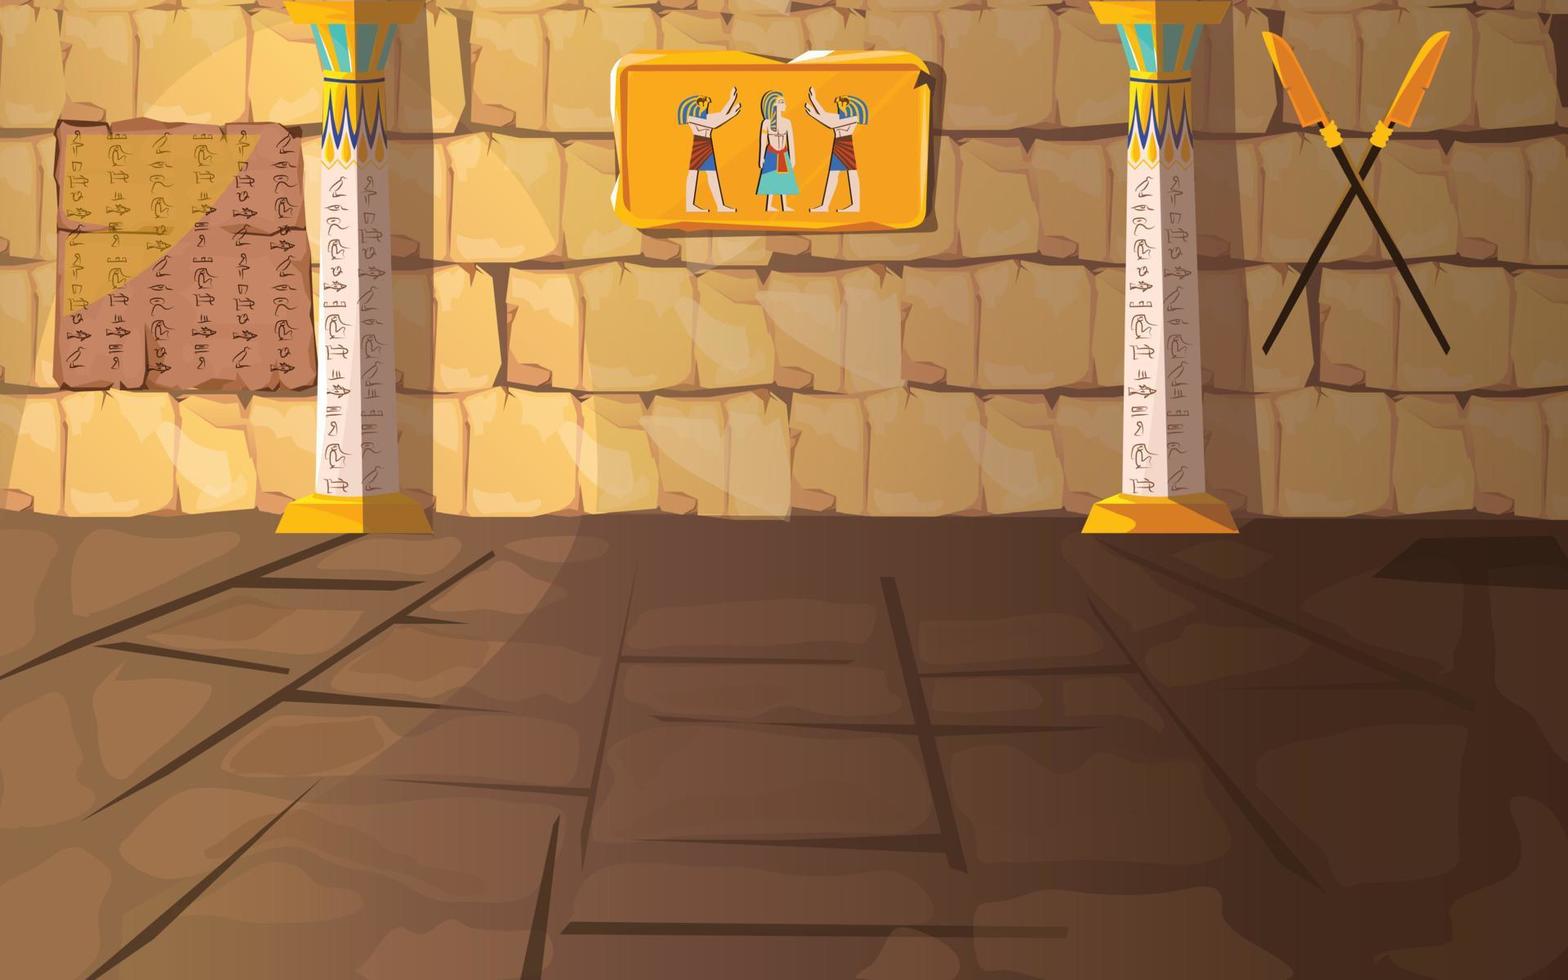 Ancient Egypt pharaoh tomb or temple room vector